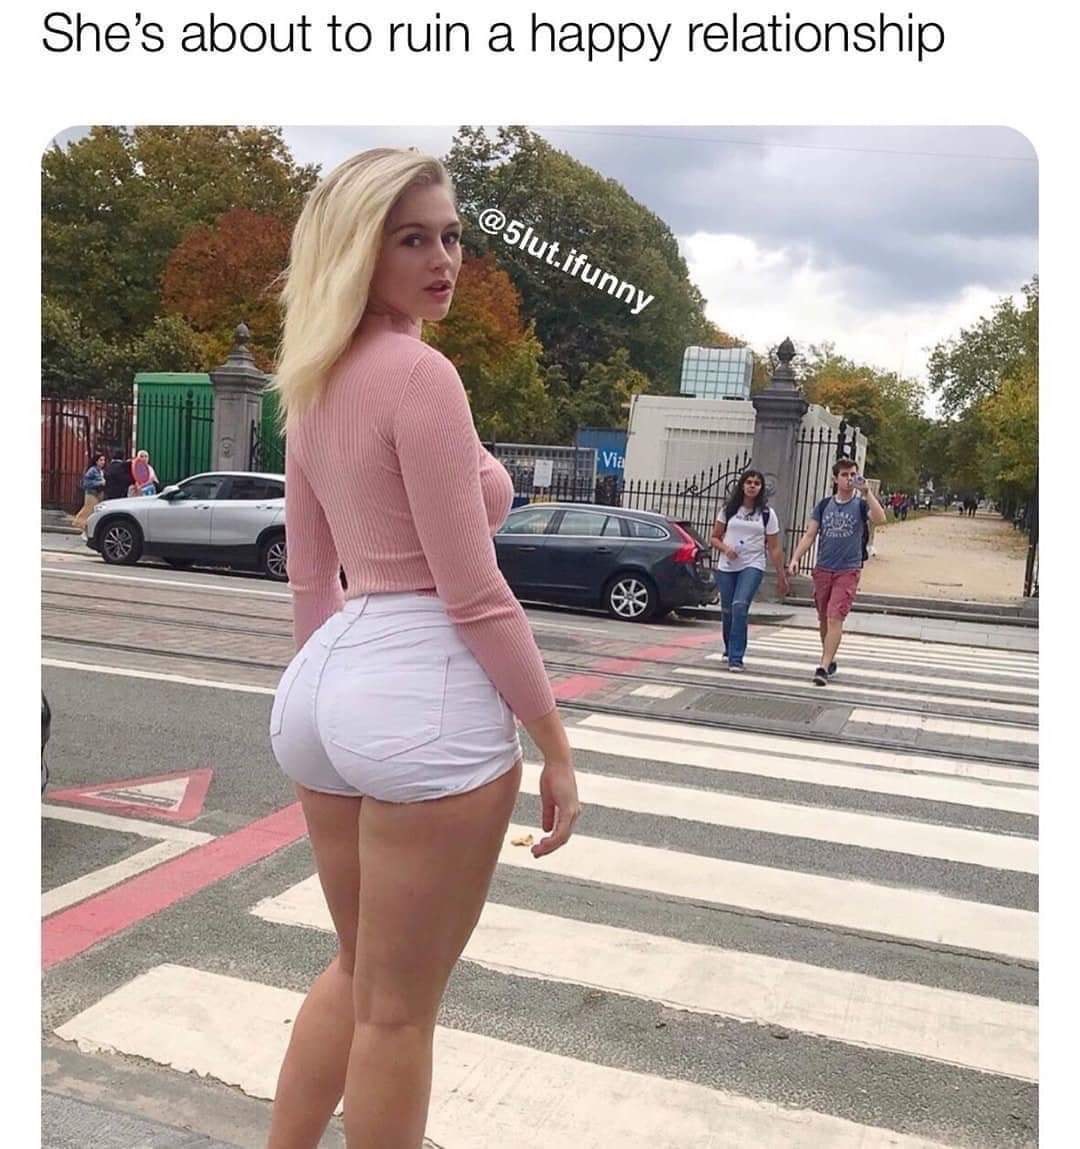 humpday meme - shoulder - She's about to ruin a happy relationship .ifunny